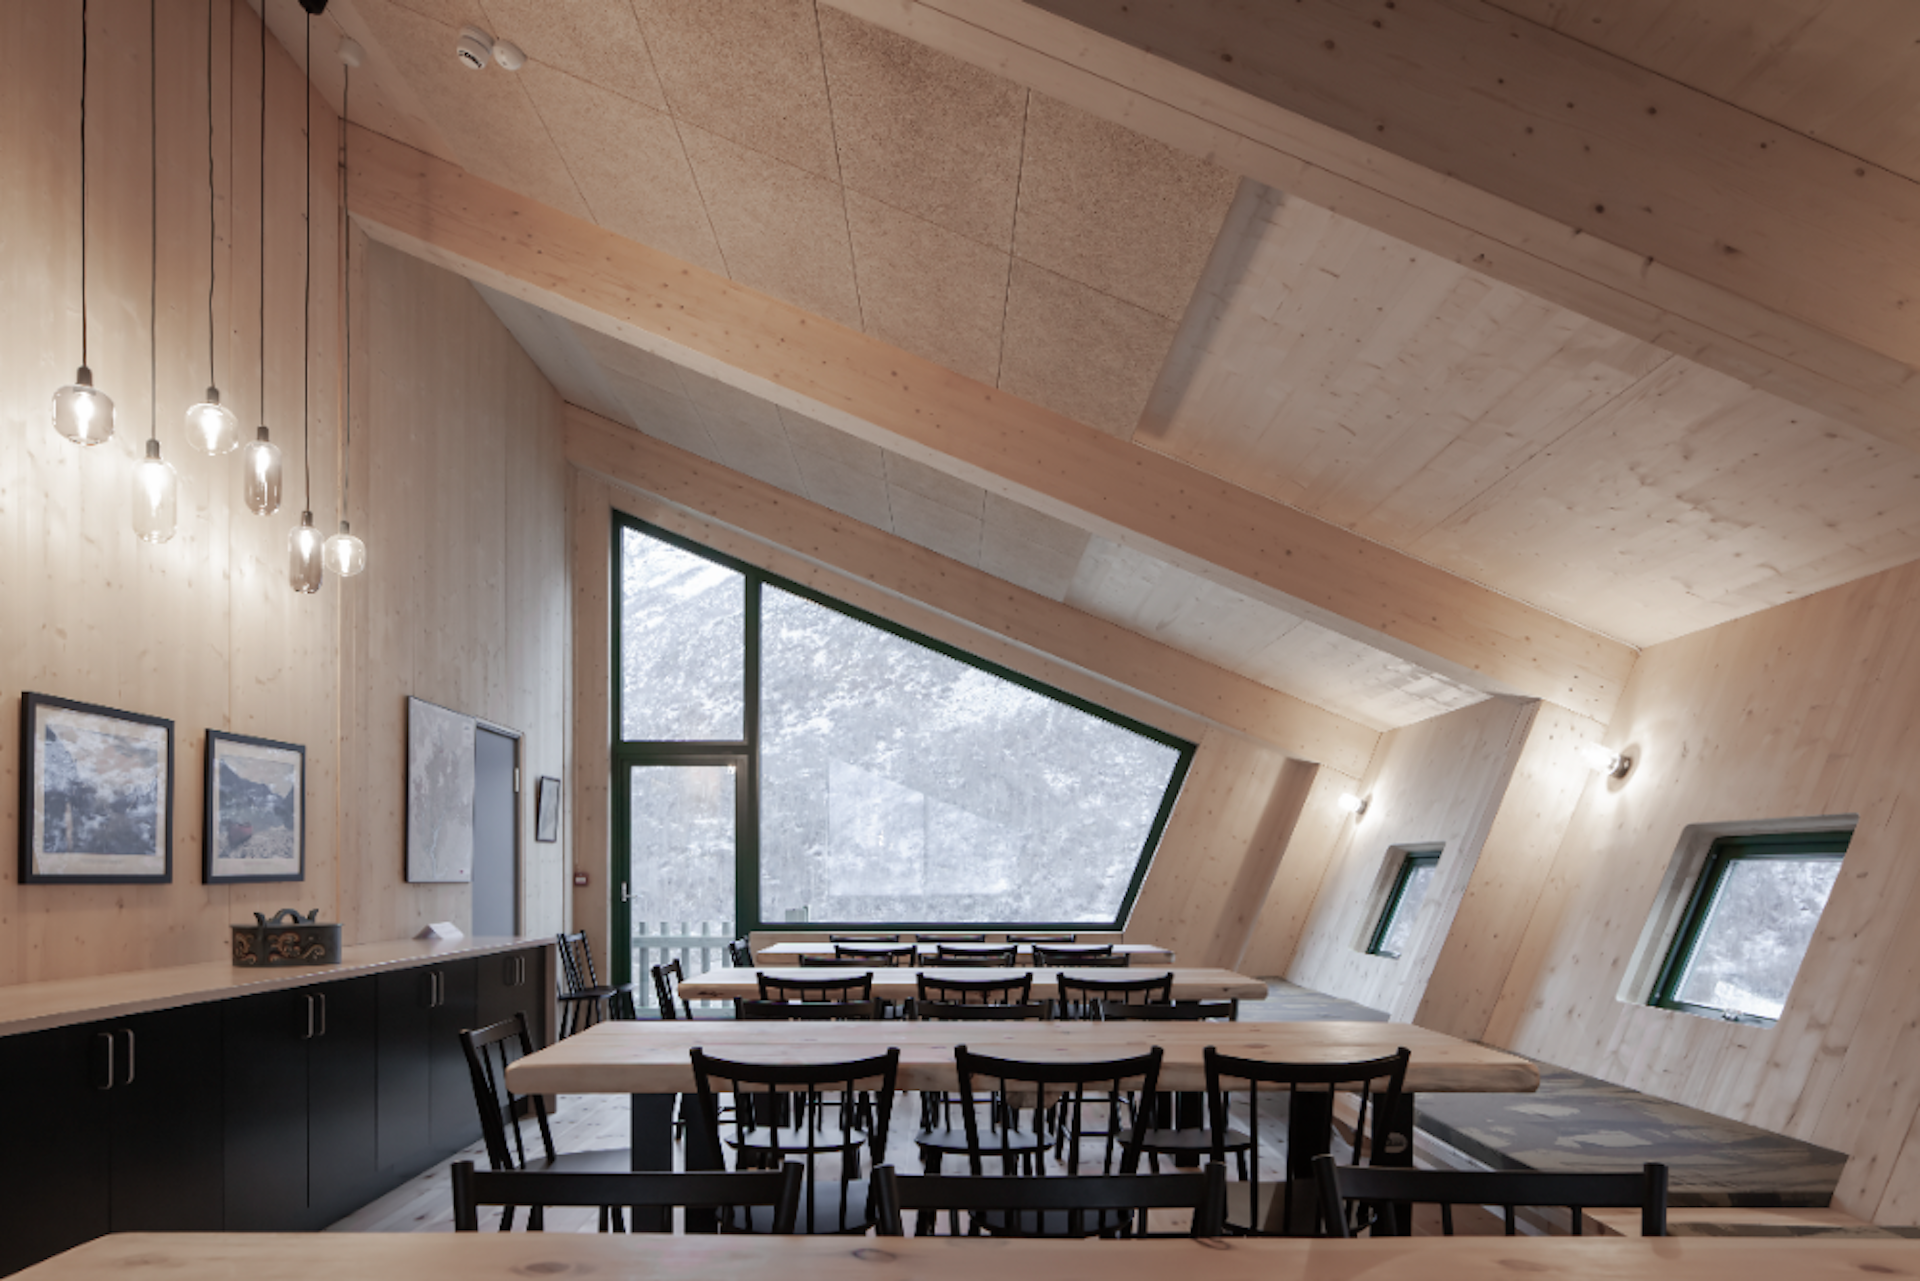 The dining room at the Tungestolen hiking cabin in Norway